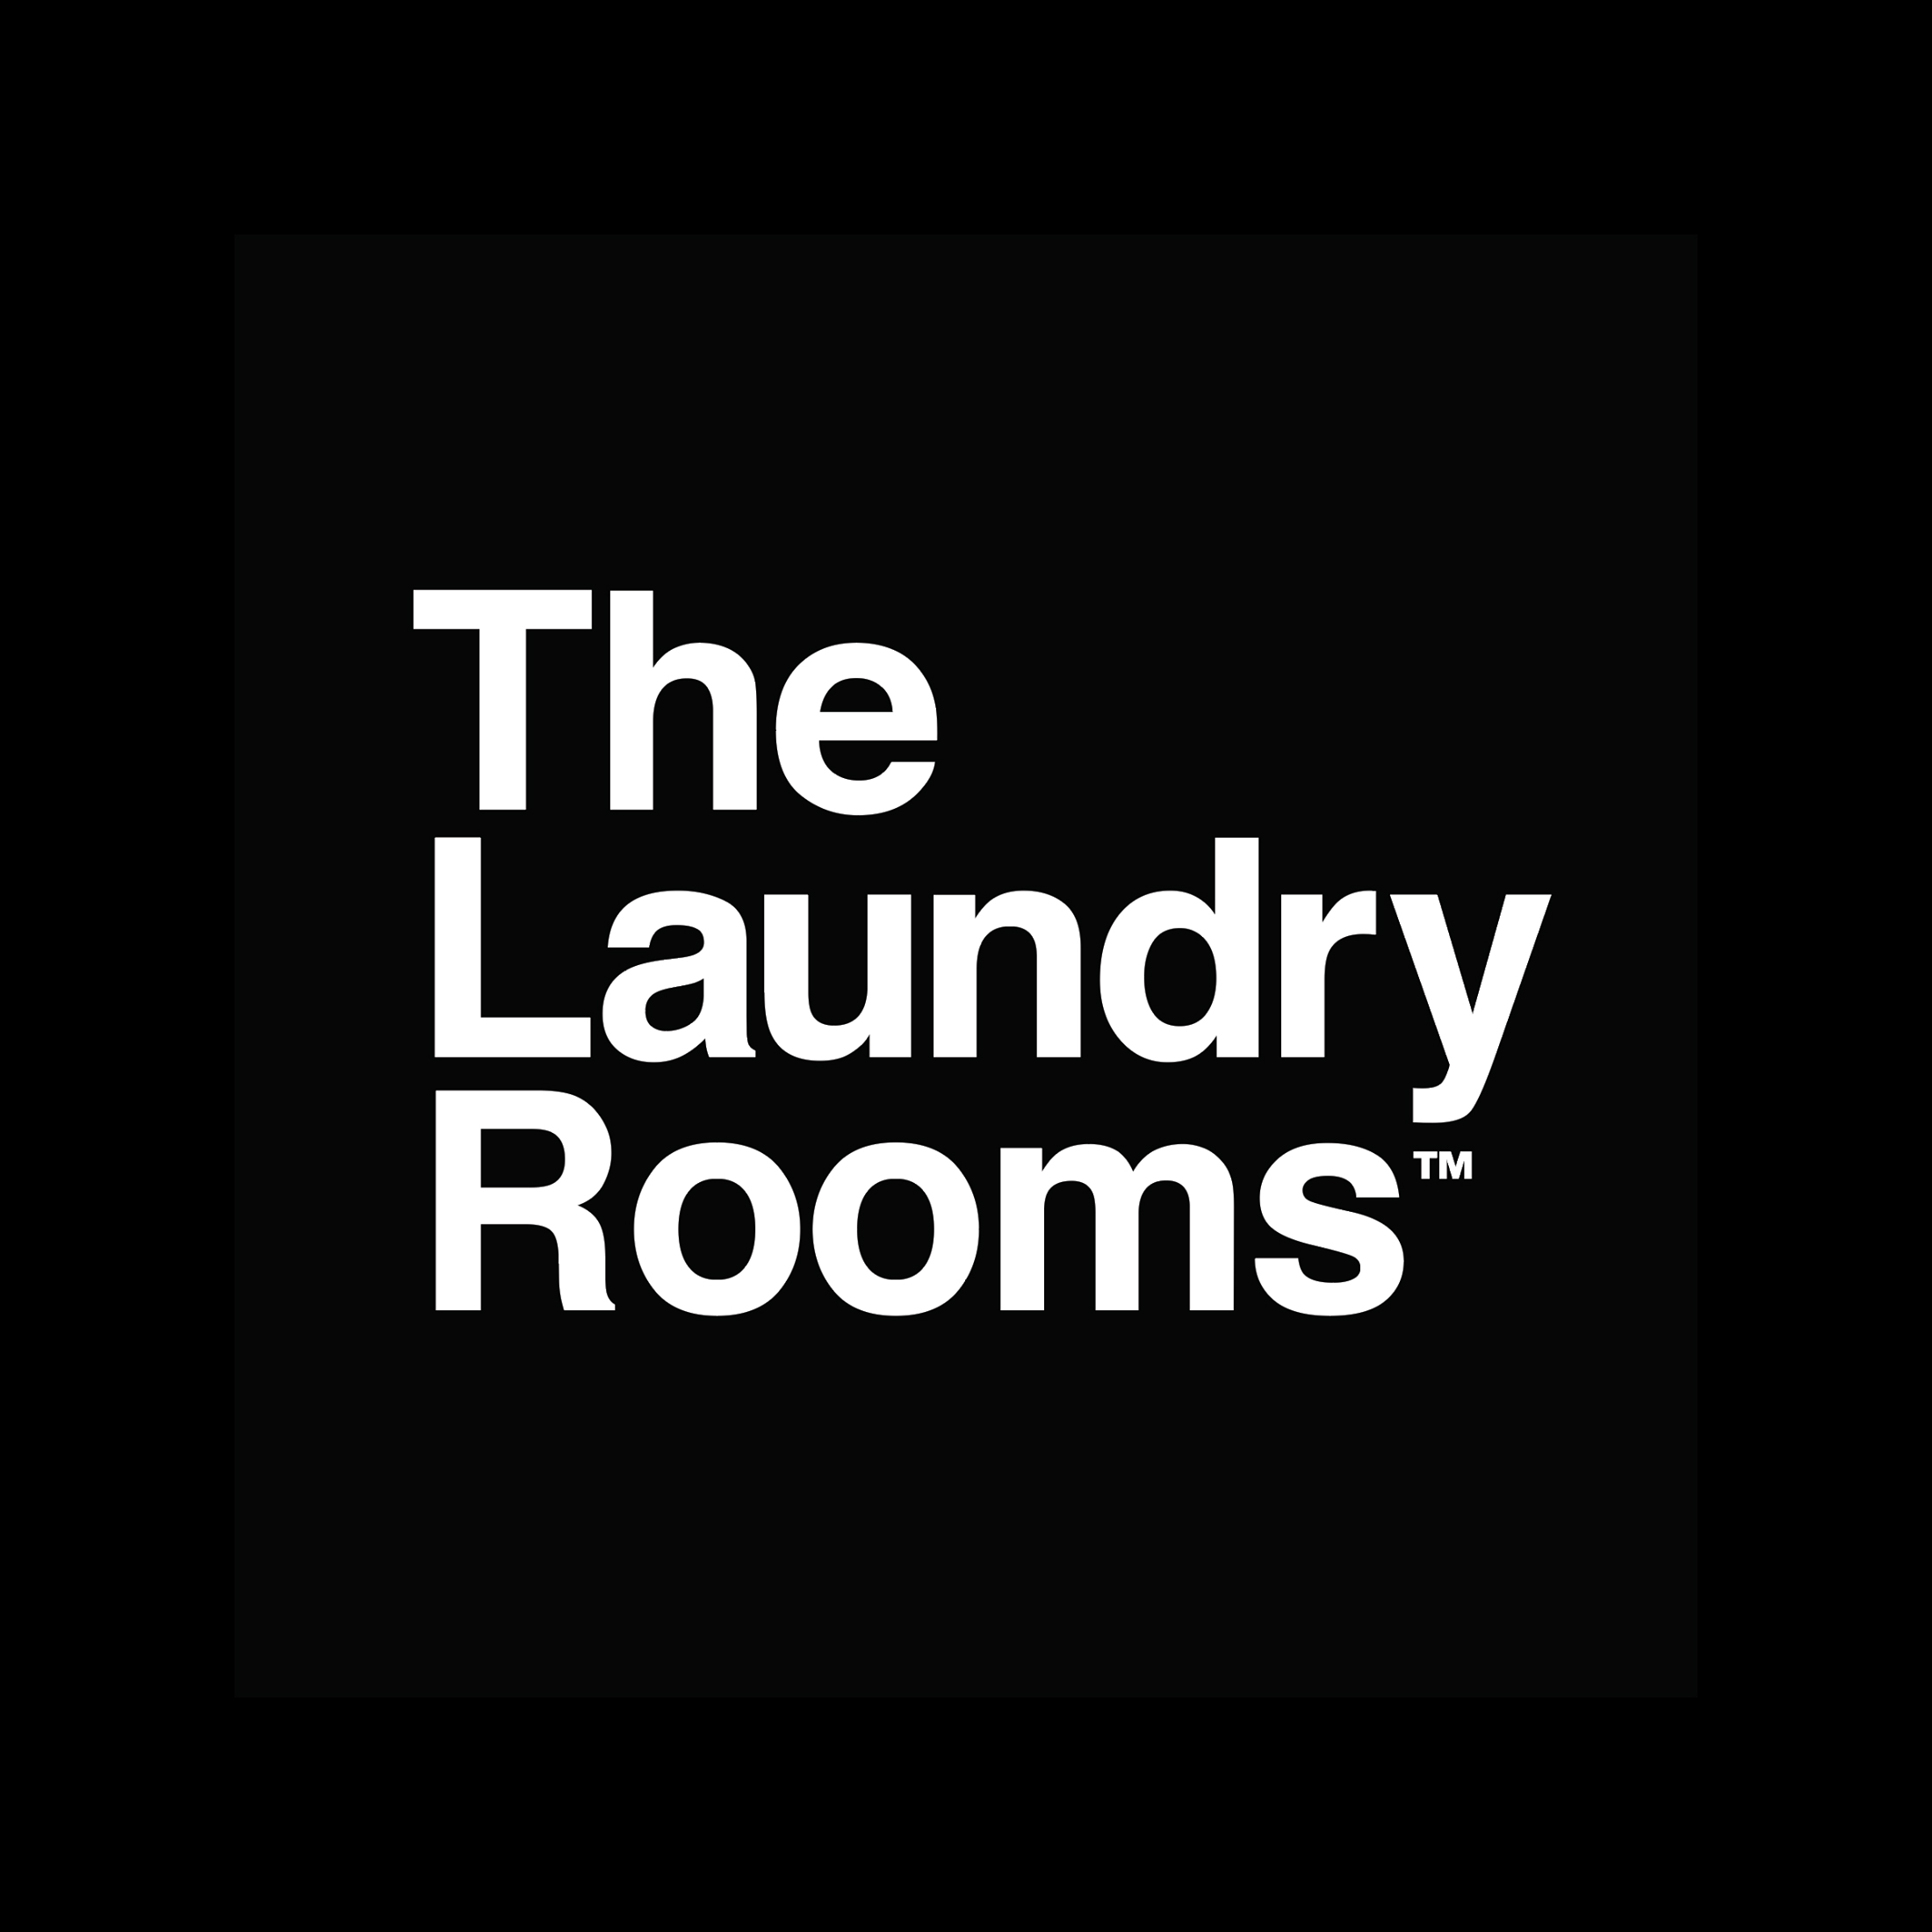 The-Laundry-Rooms-black-lrg